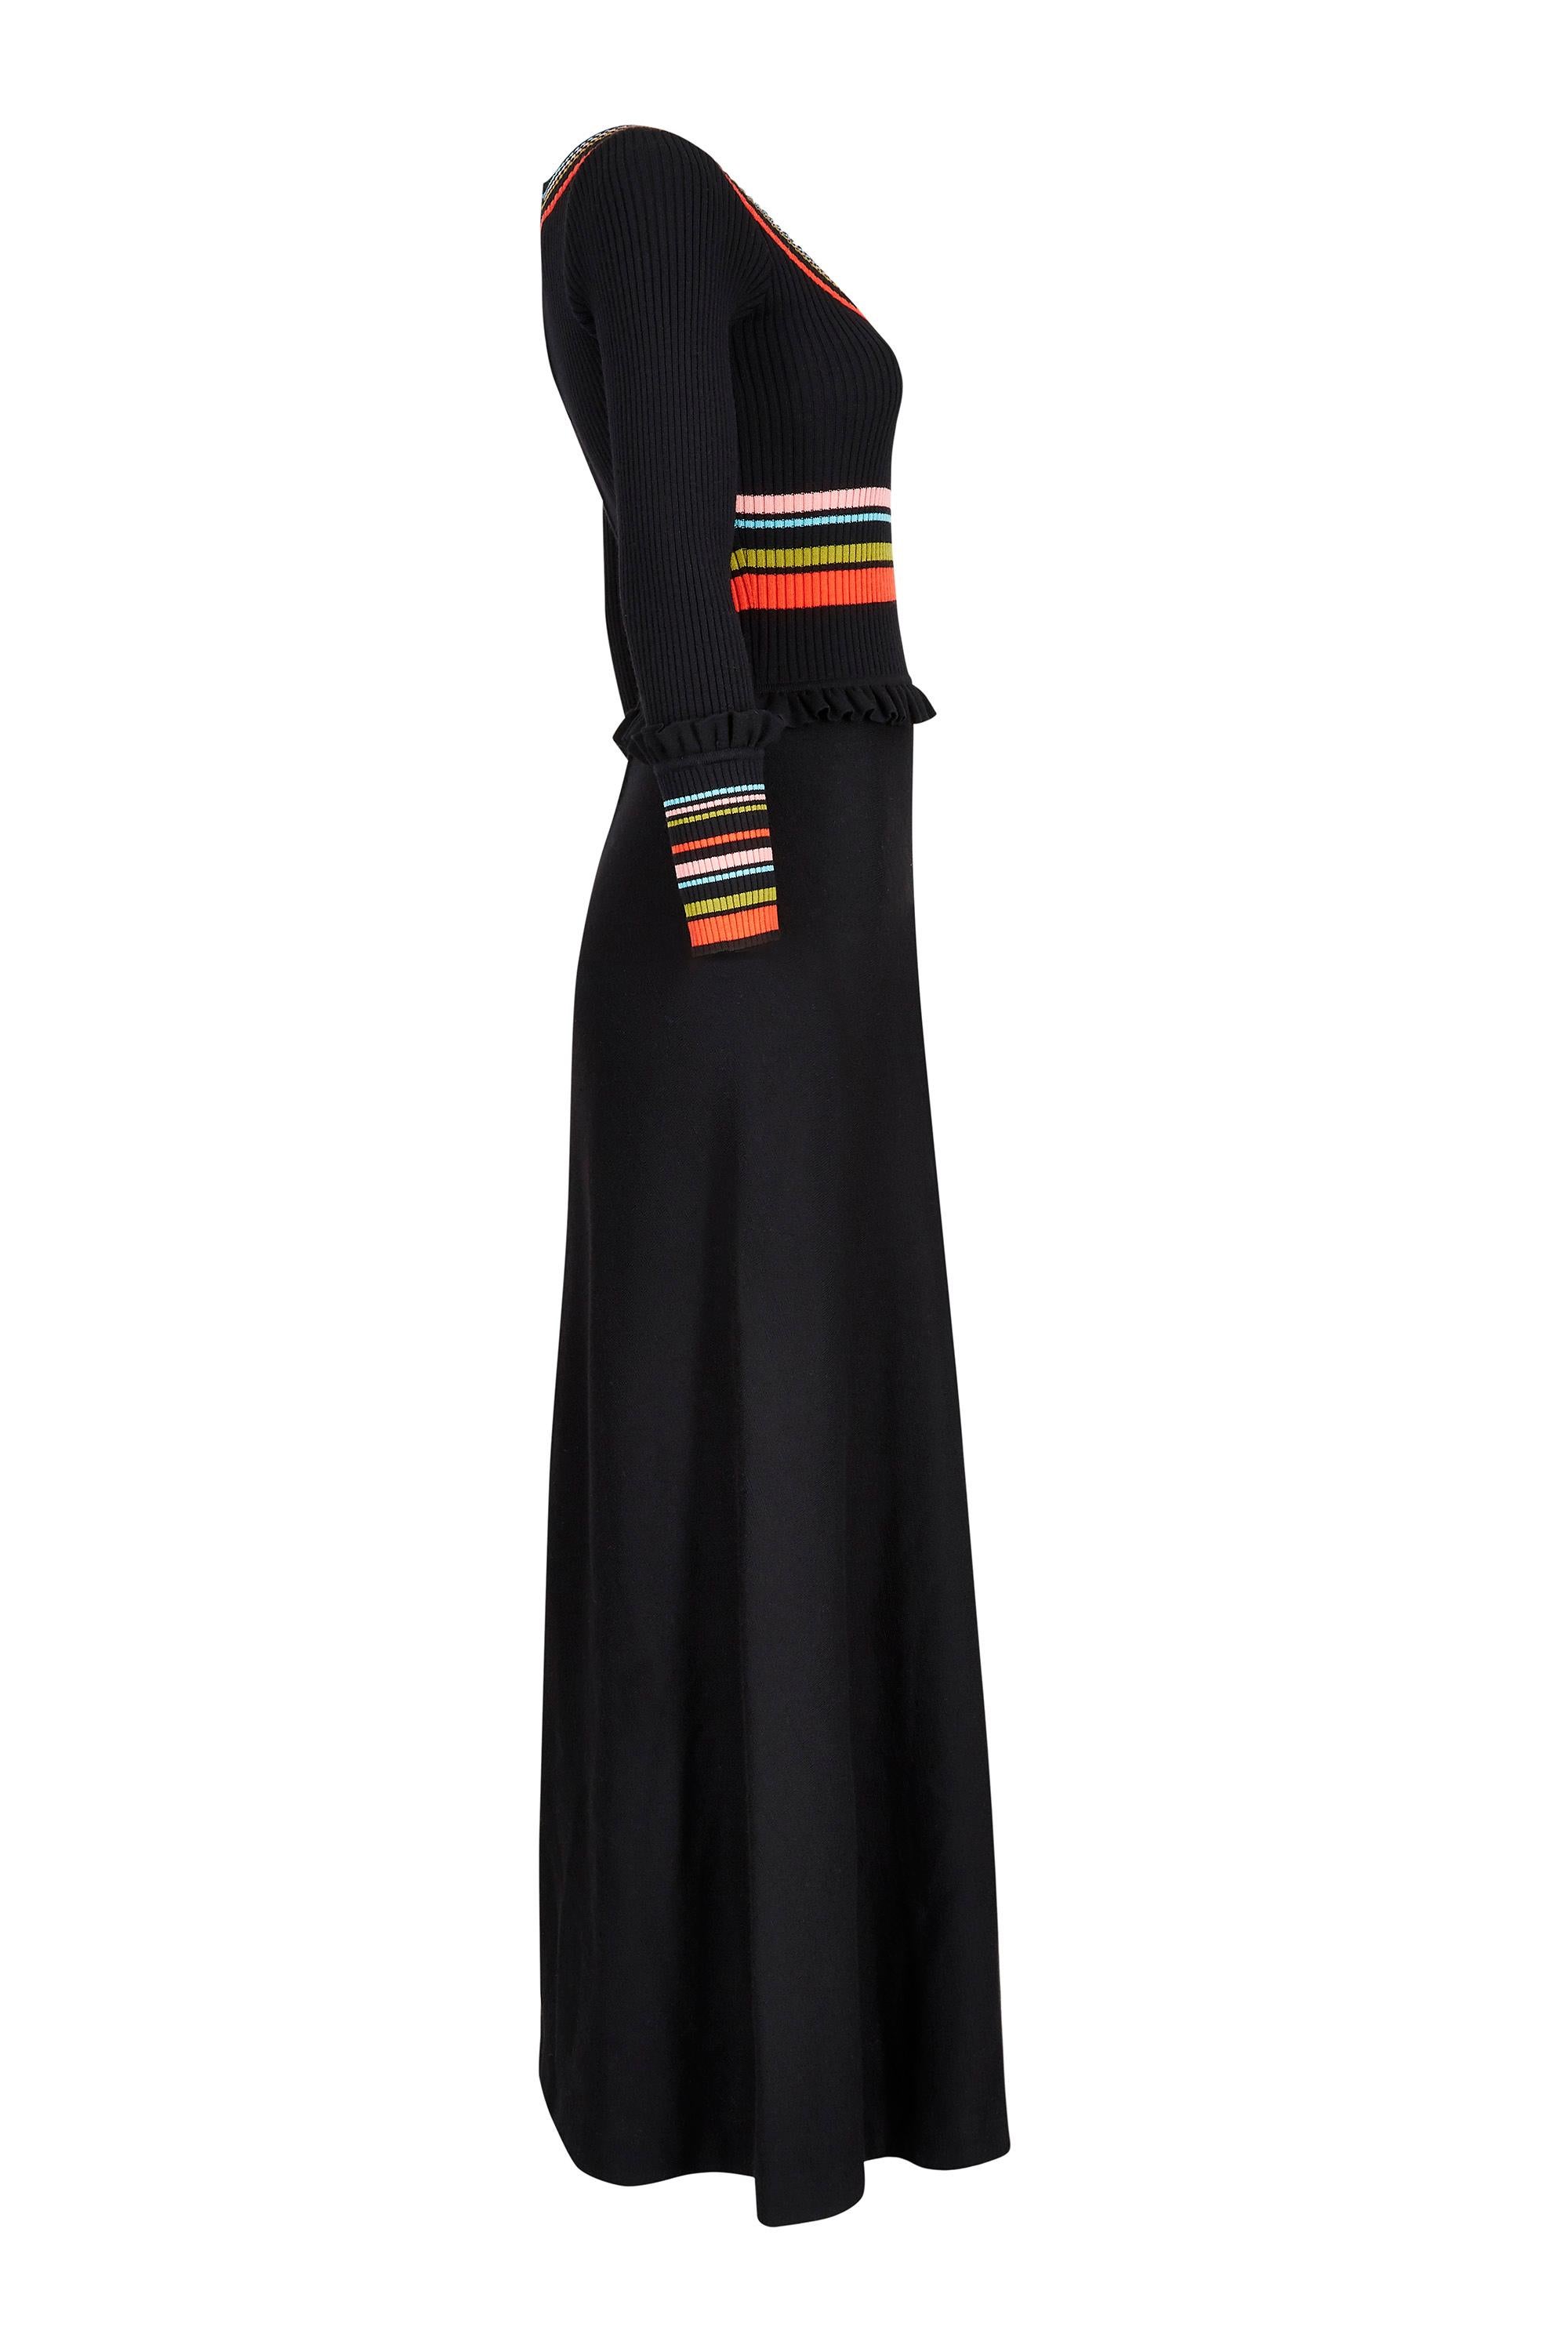 This sensational 1970s black jersey knit wool ribbed maxi dress is by Italian design house Crissa Linea Italiana and is in pristine vintage condition with some lovely details. The dress is a classic style for the era with the jersey stretch fabric